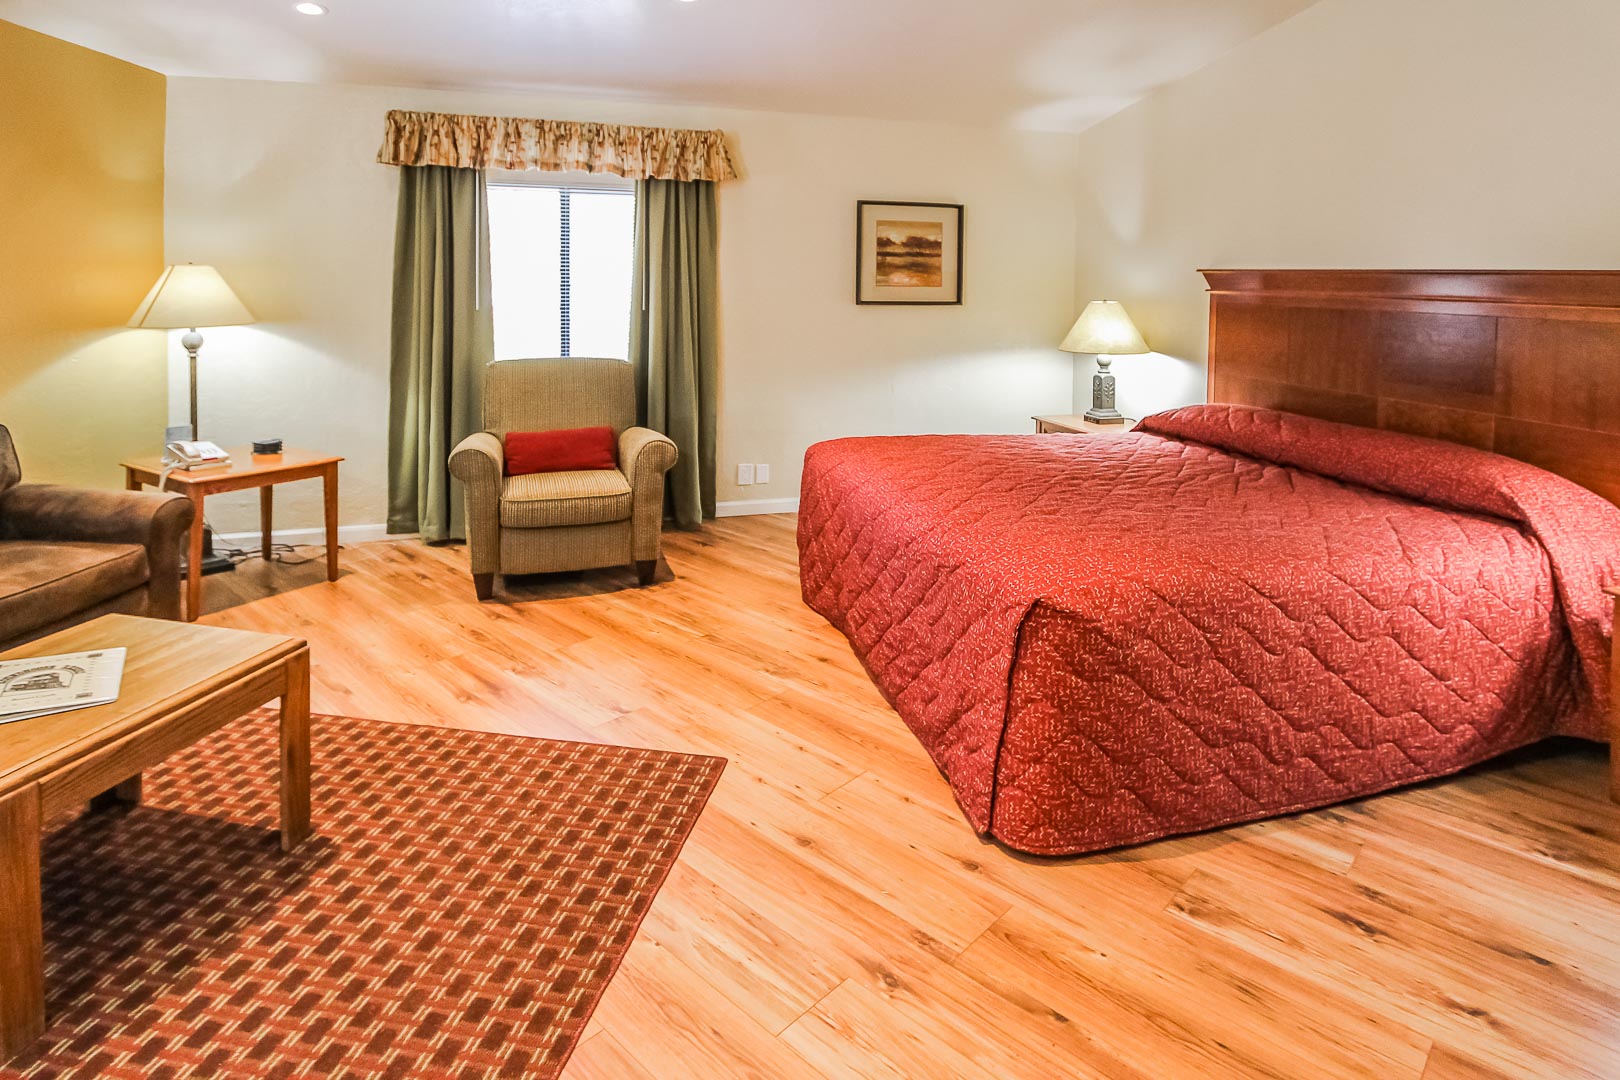 A king size bed at VRI's Roundhouse Resort in Pinetop, Arizona.